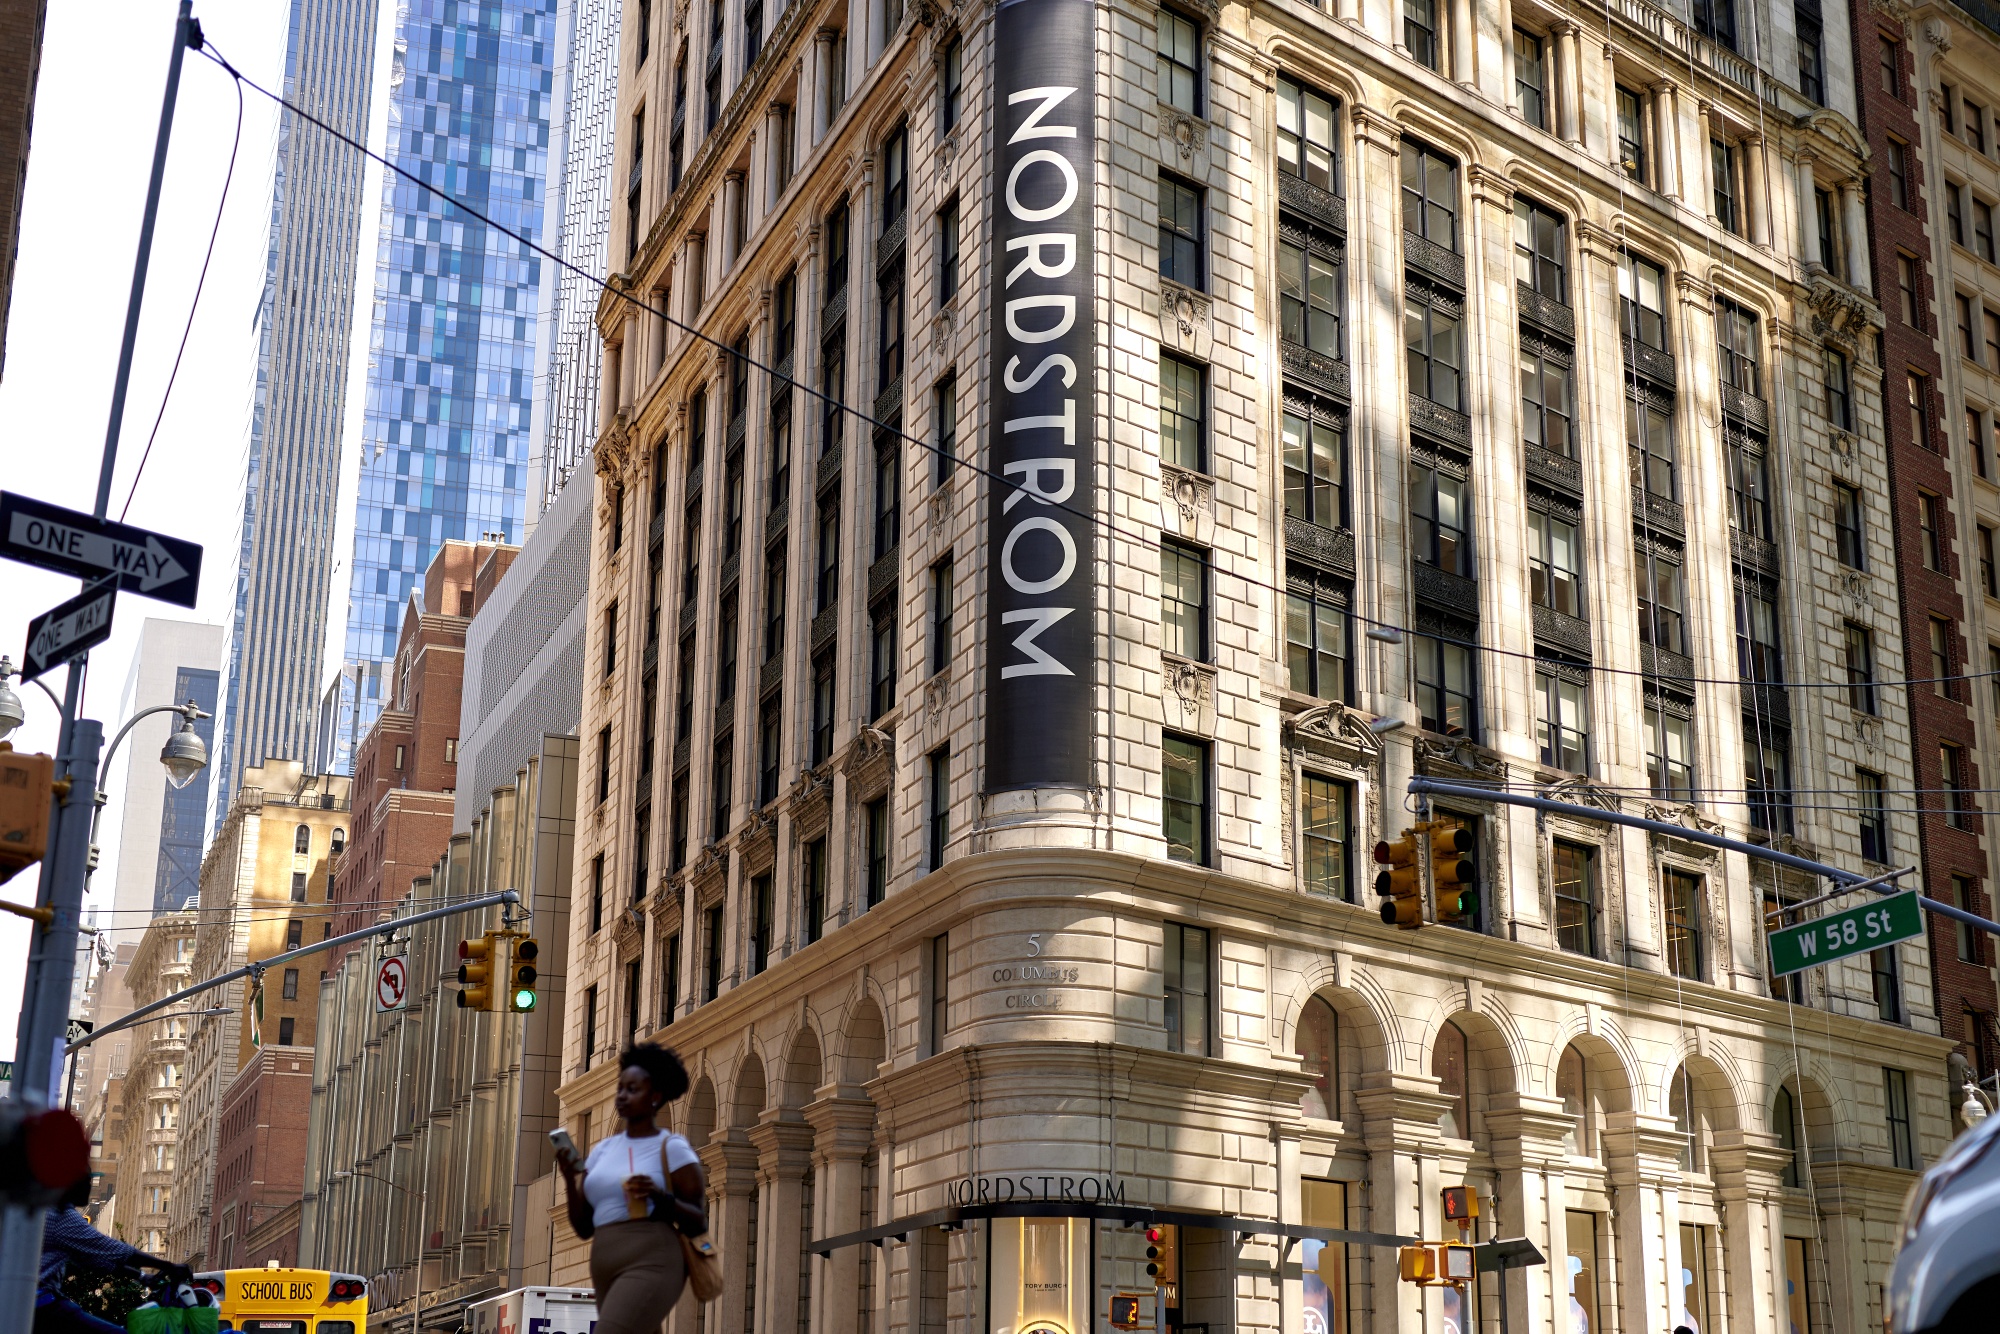 Nordstrom's new flagship store in New York